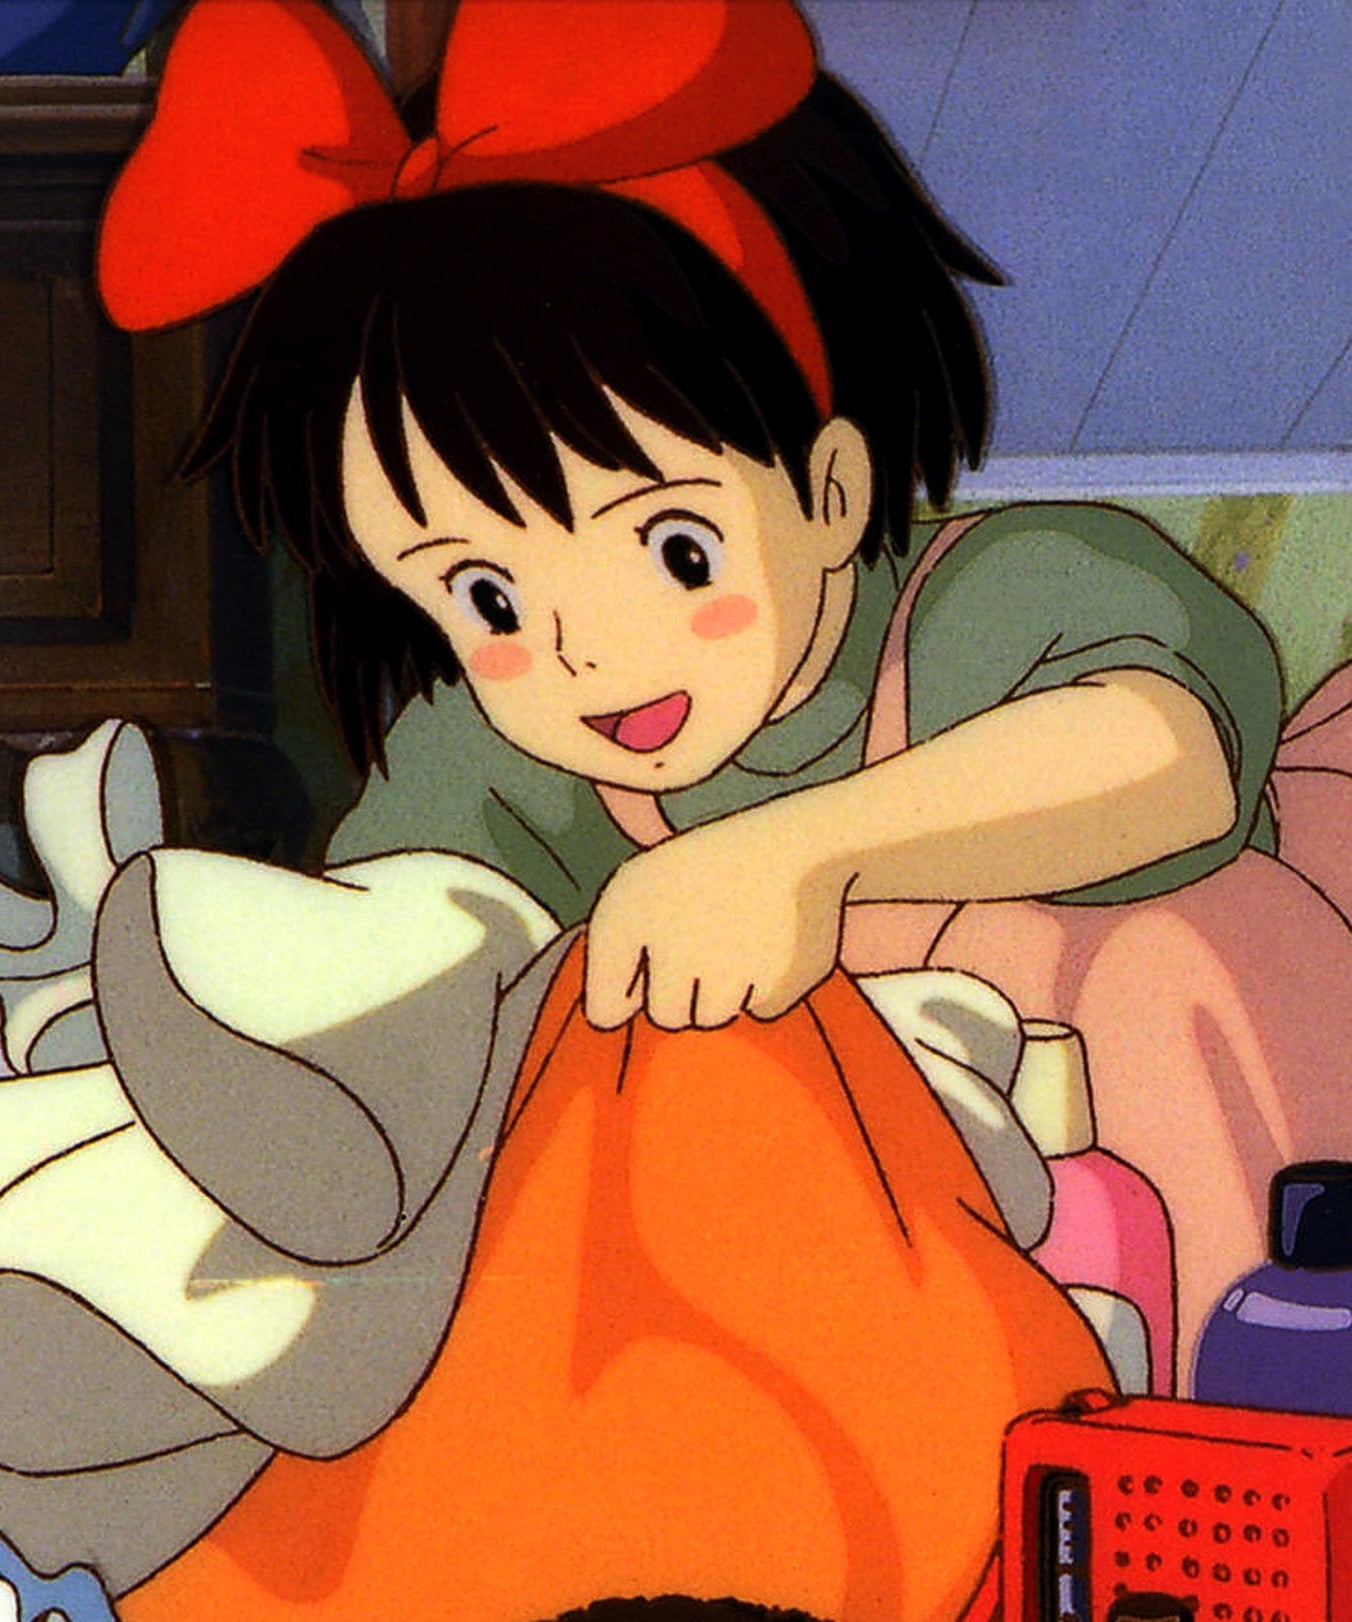 Studio Ghibli movies on Netflix that you will fall in love with